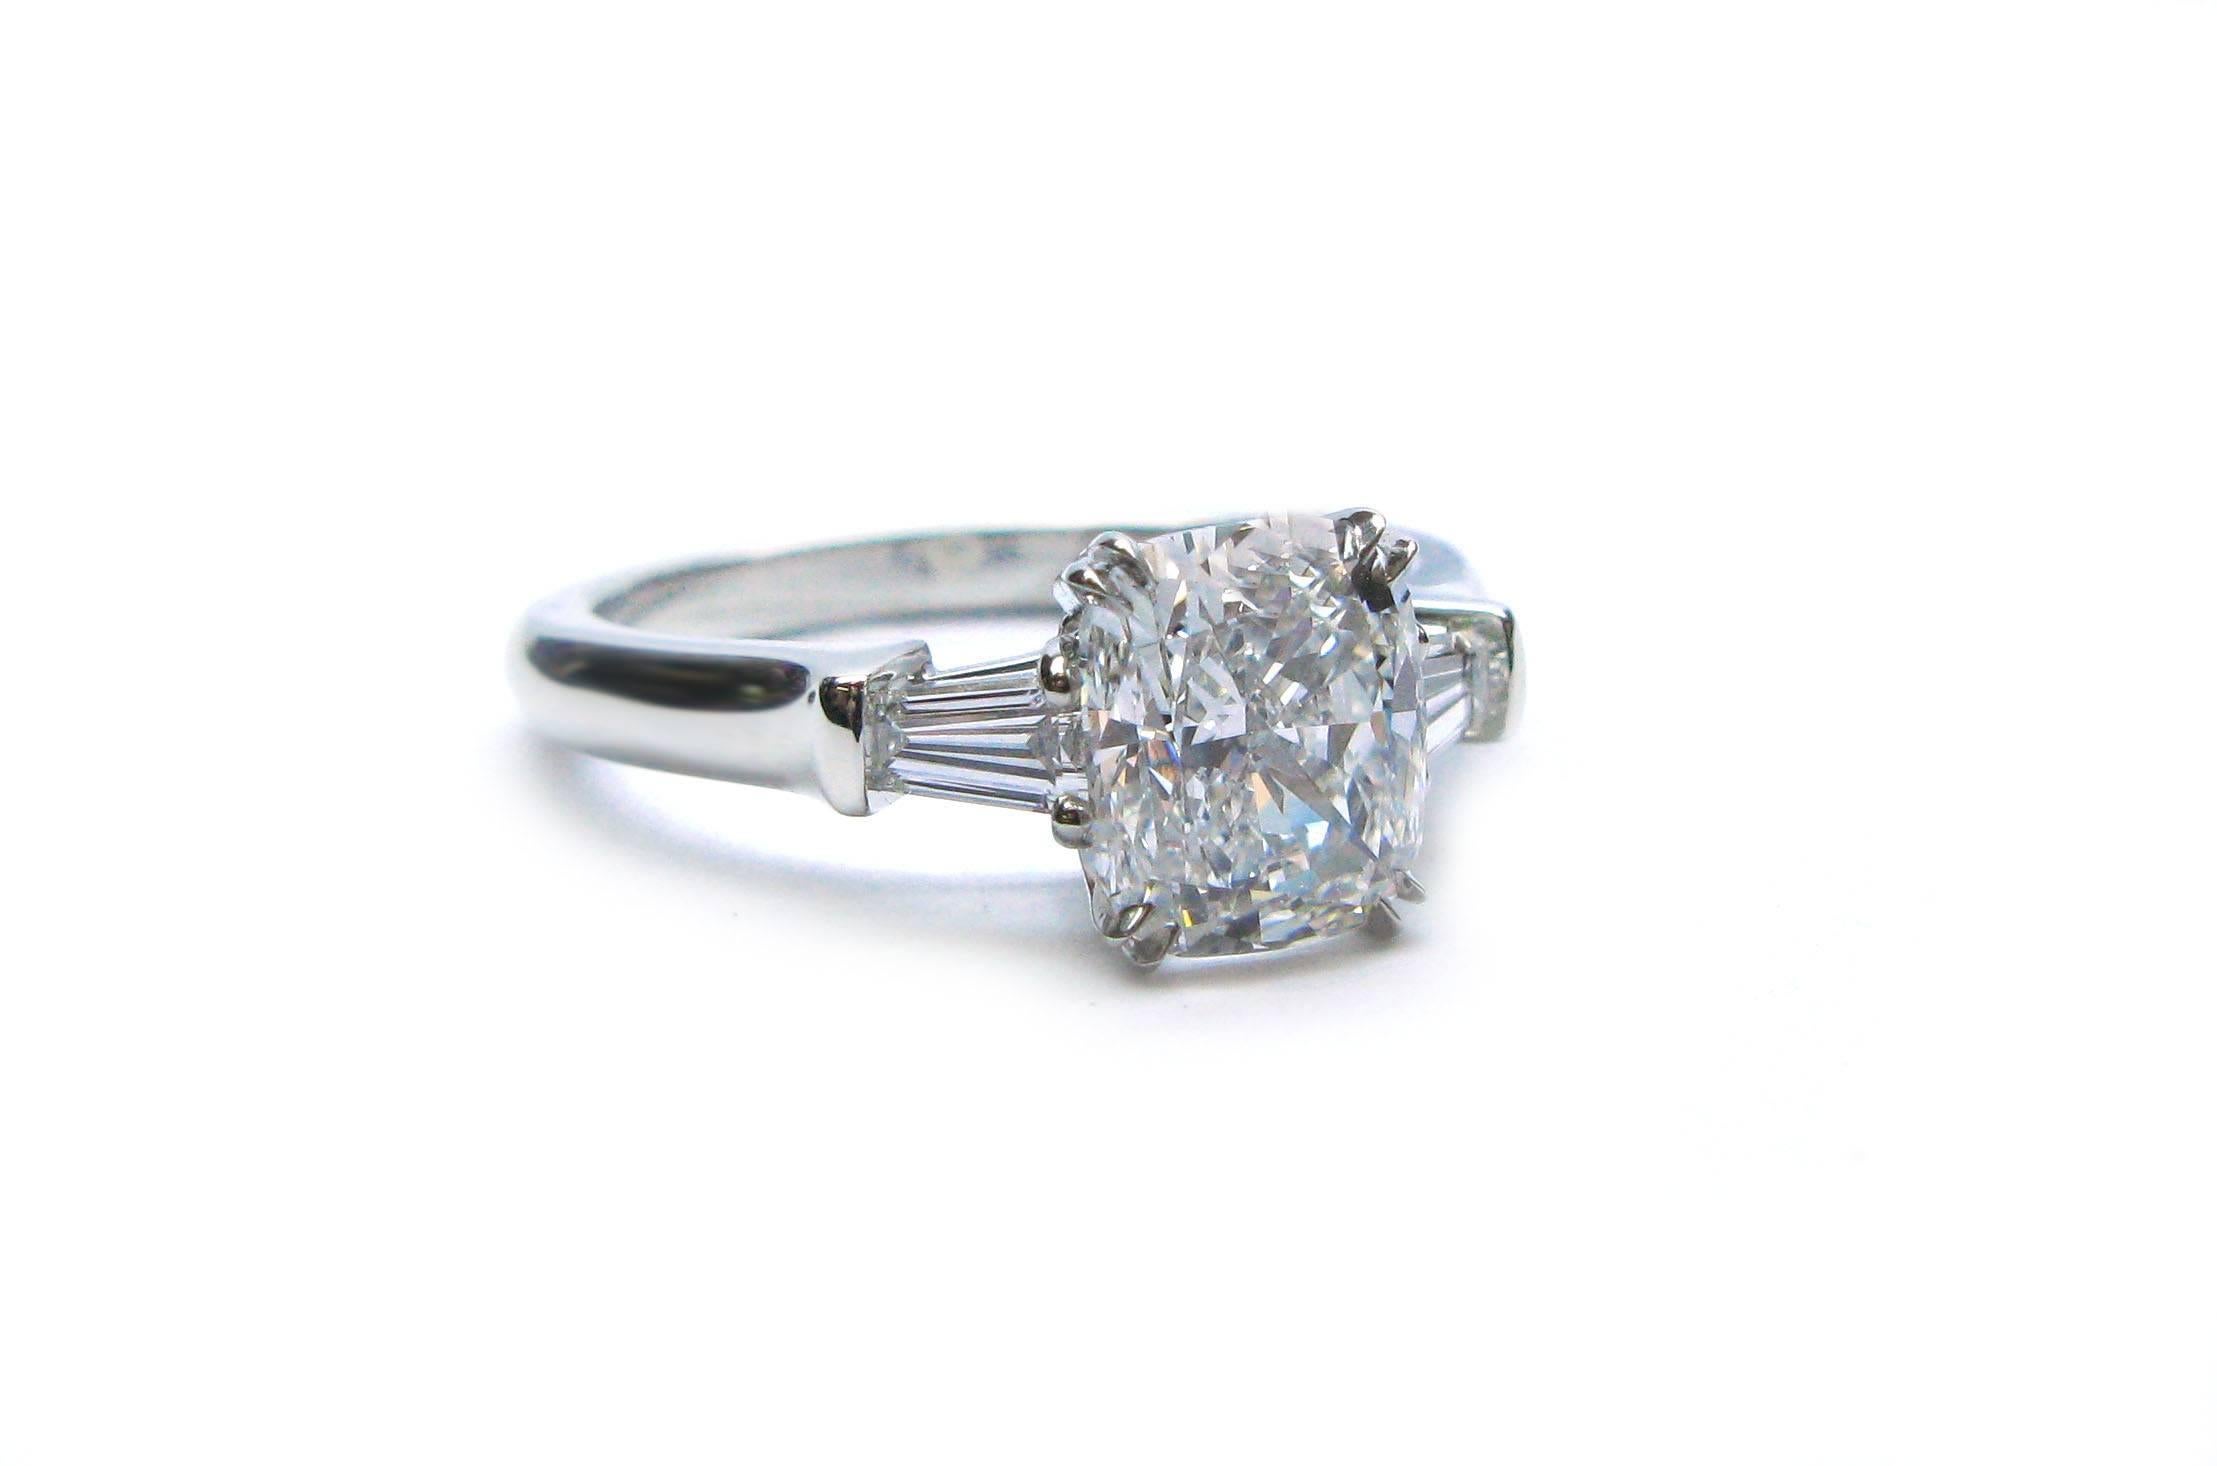 This lovely Harry Winston signed platinum engagement ring features a GIA certified 1.70ct, F color, VS1 clarity, Cushion cut diamond center stone with tapered baguette diamond sidestones. With this stunning ring on her finger she will be the envy of